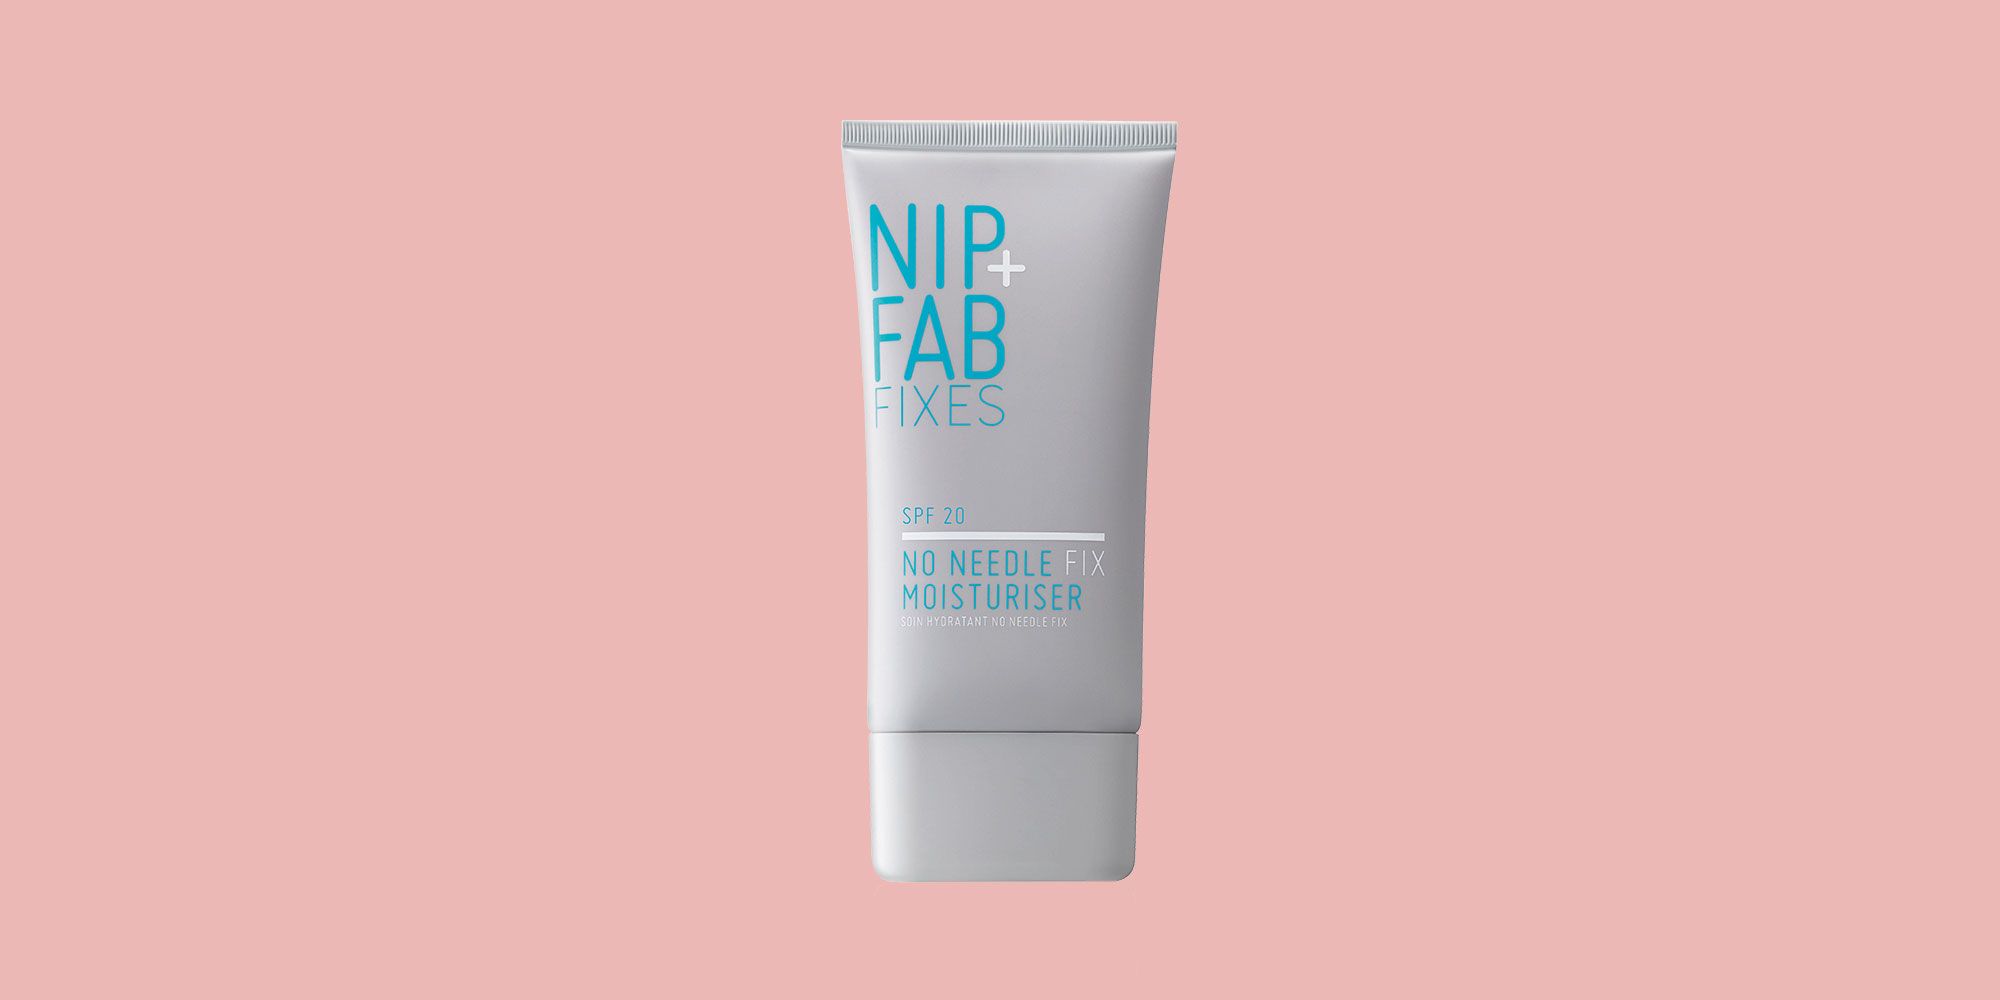 Fab nip review and Gifted